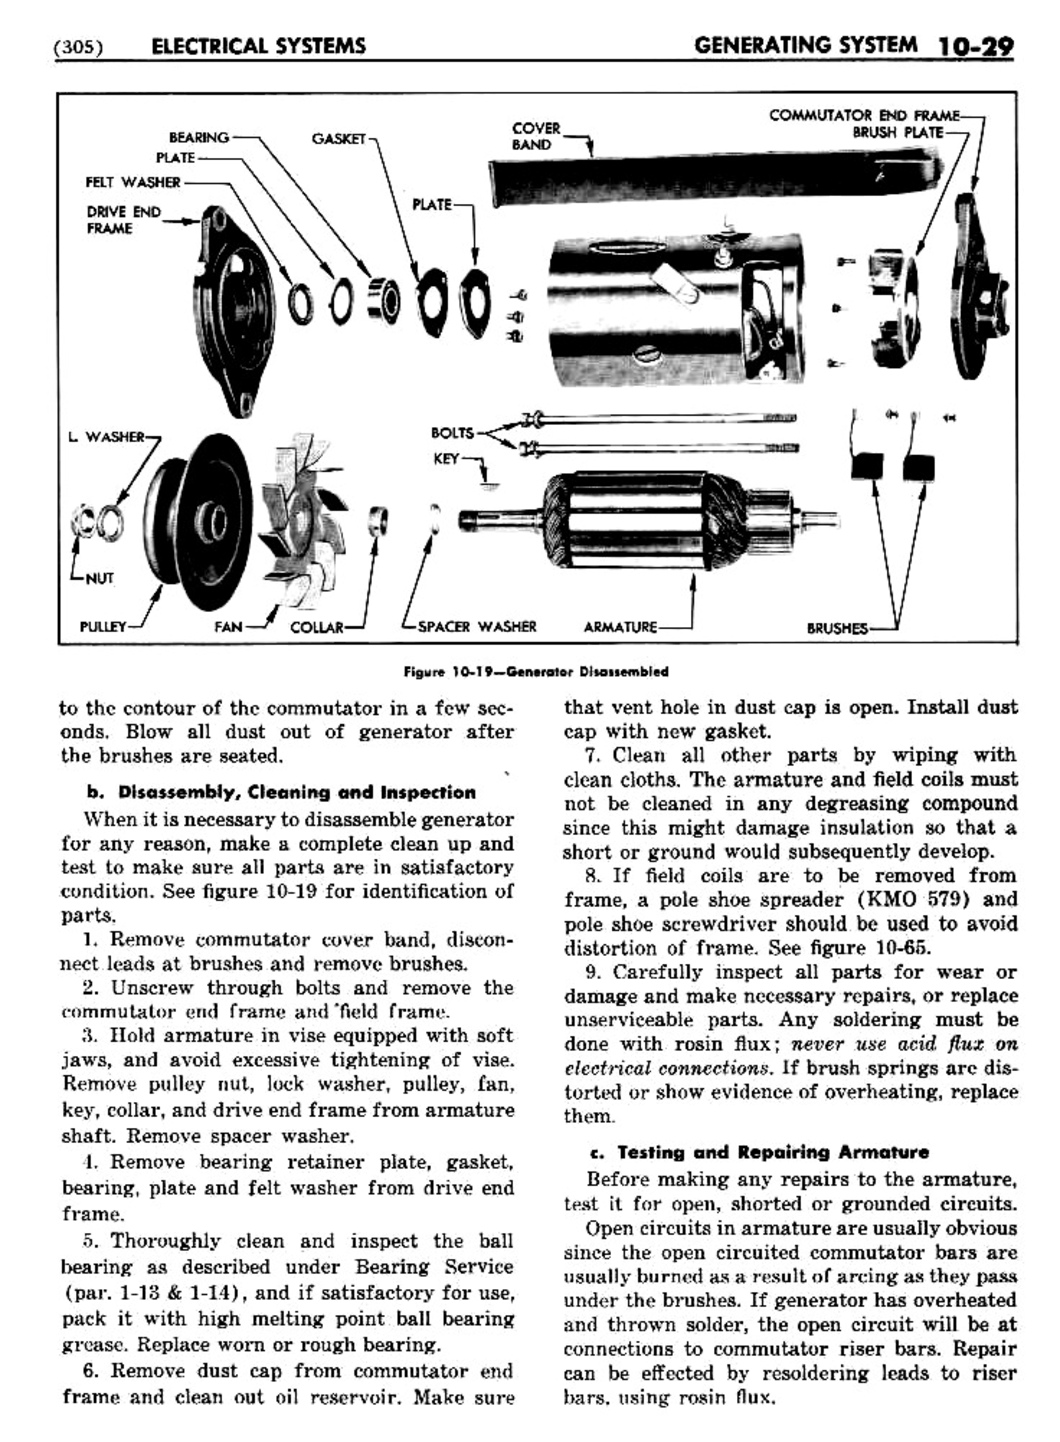 n_11 1948 Buick Shop Manual - Electrical Systems-029-029.jpg